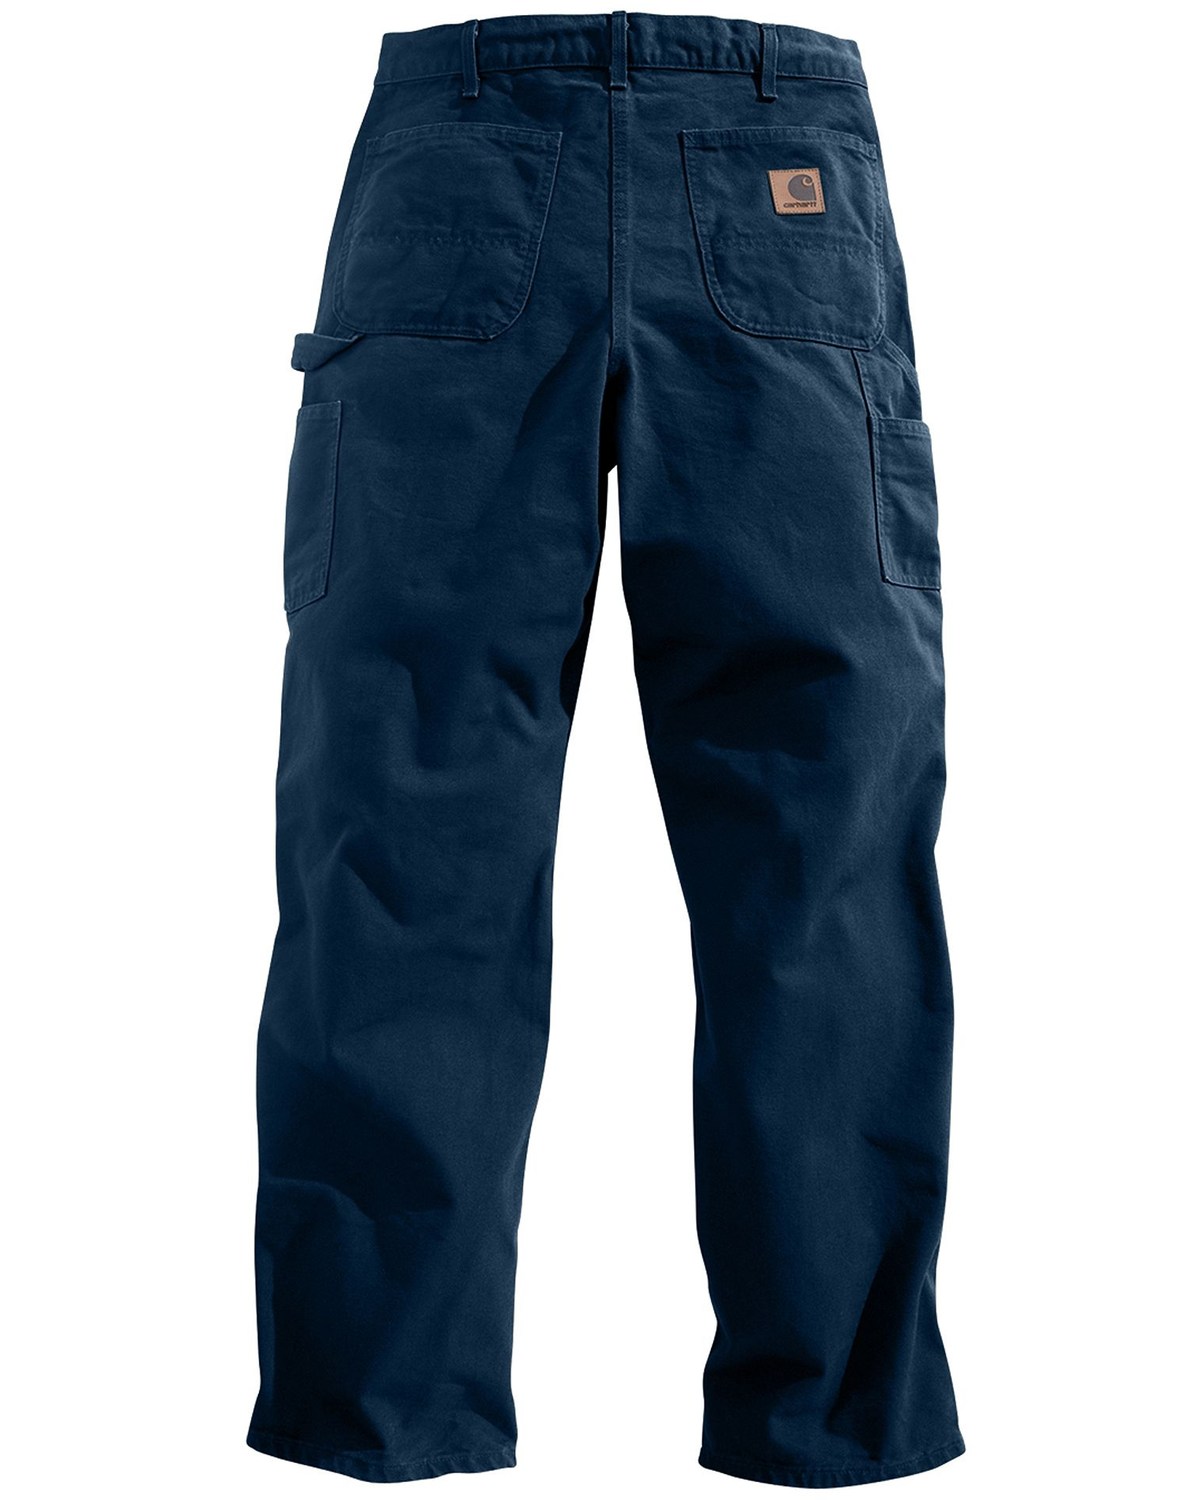 Carhartt Men/'s Washed Duck Work Dungaree Pant